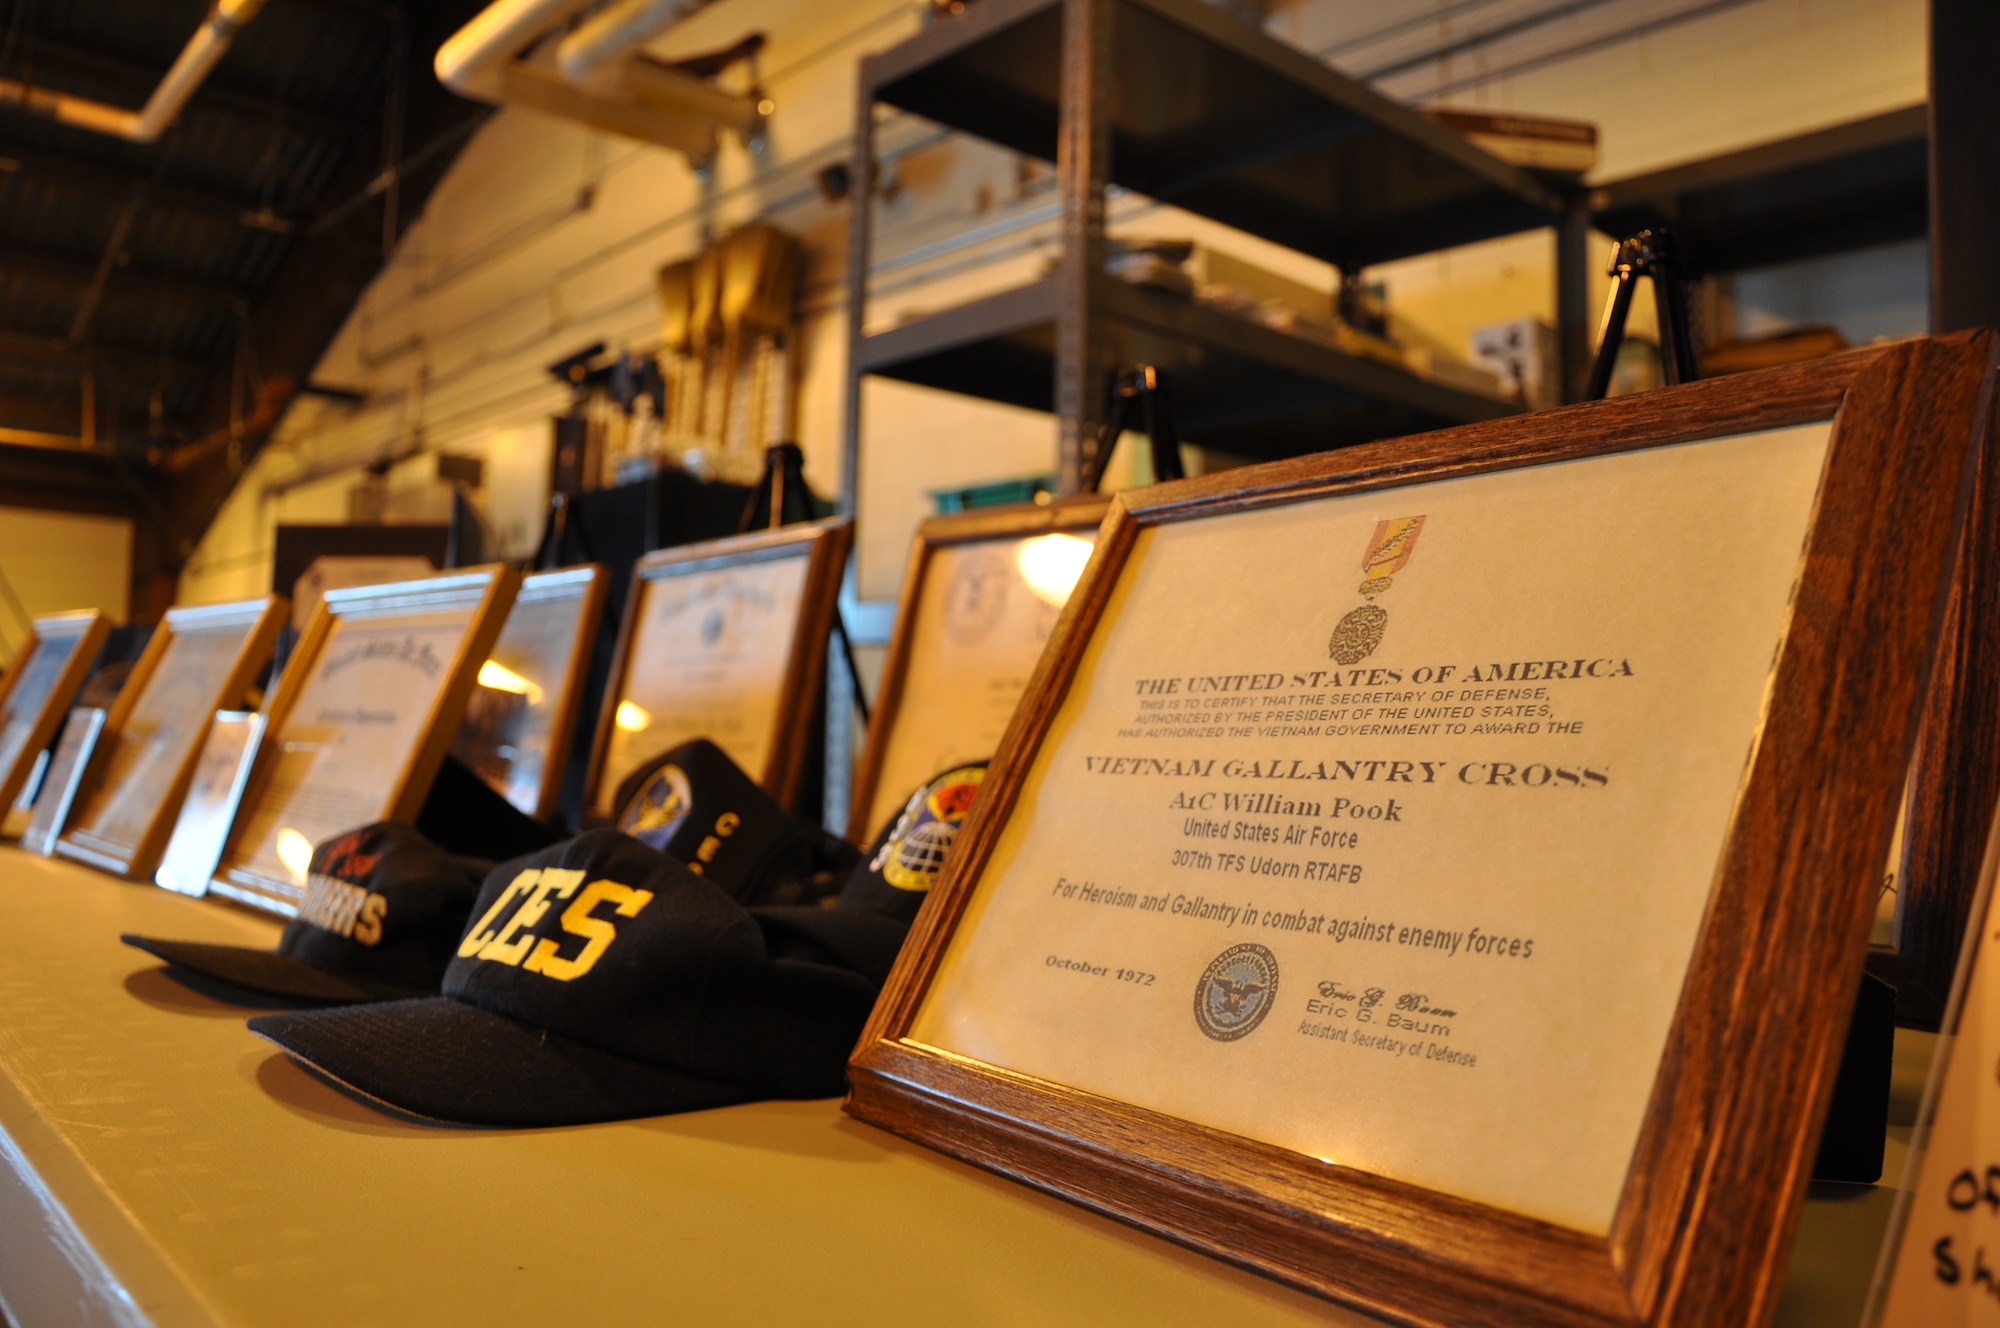 Citations, photographs and other relics belonging to Master Sgt. William Pook, a reservist assigned to the 633rd Civil Engineer Squadron, are displayed during his retirement ceremony at the squadron’s Emergency Management flight warehouse at Langley Air Force Base, Va., Sept. 23, 2011. Pook, one of a handful of Vietnam veteran’s still serving, retired after 40 years in the Air Force. (U.S. Air Force photo by Senior Airman Jason J. Brown/Released)